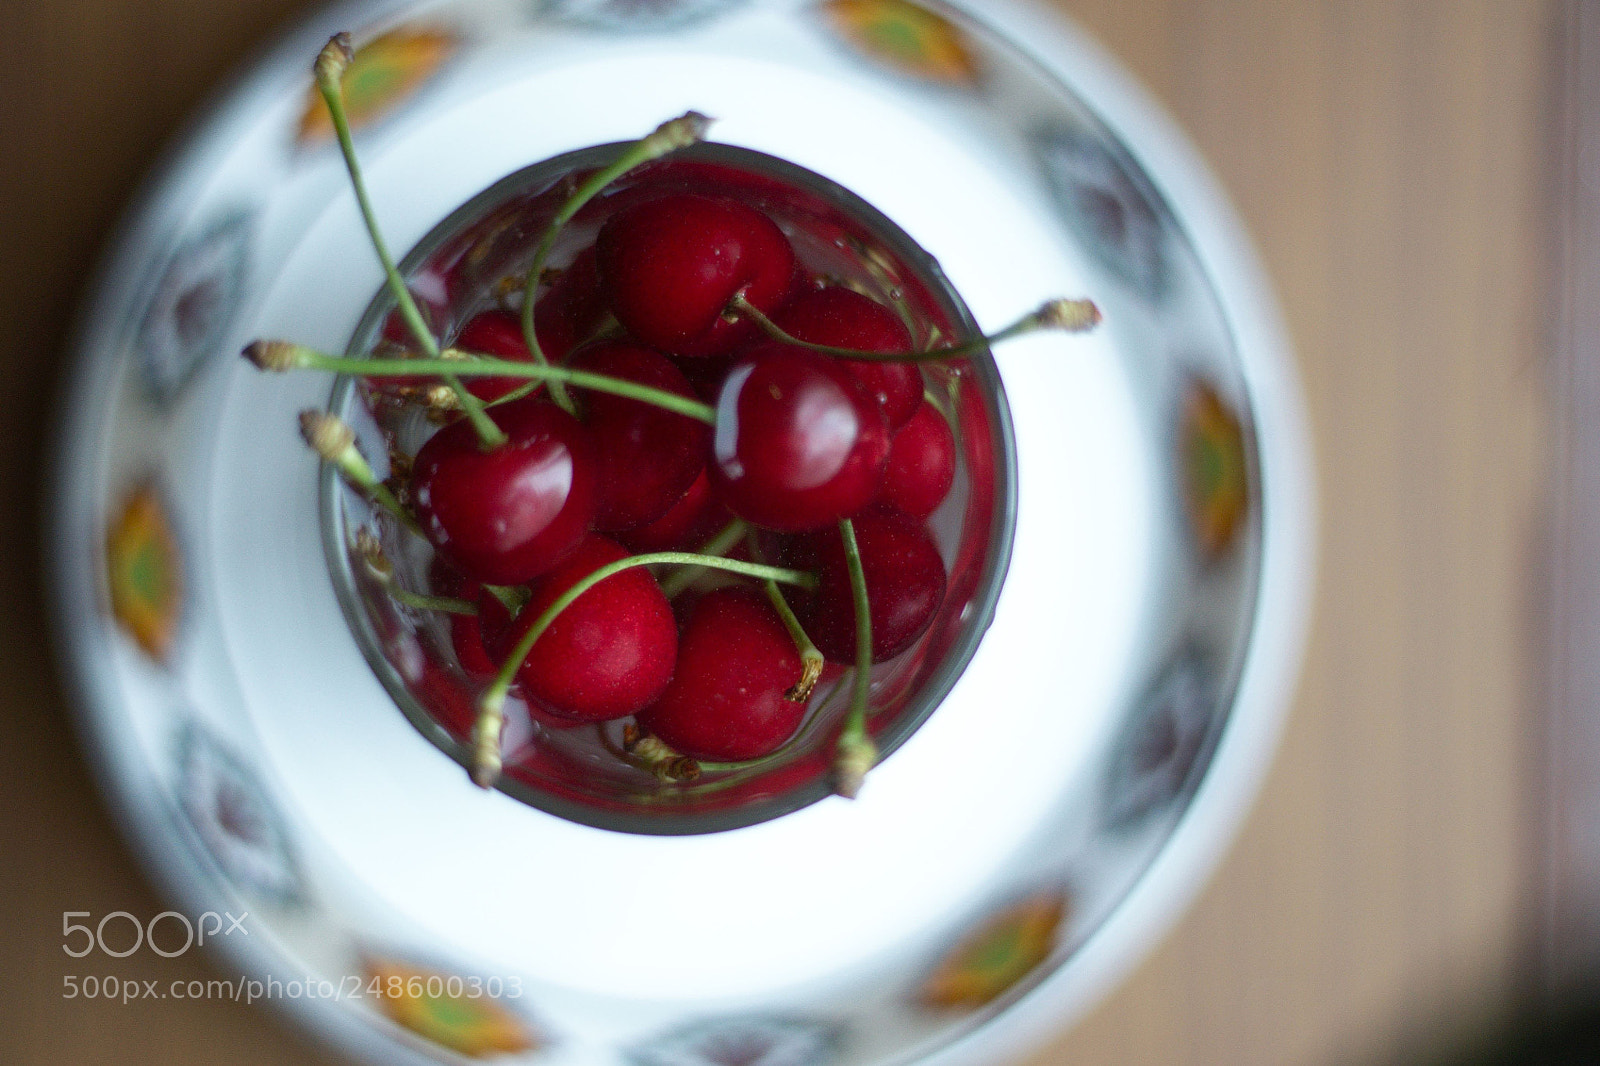 Nikon D90 sample photo. Cherries in a plate photography